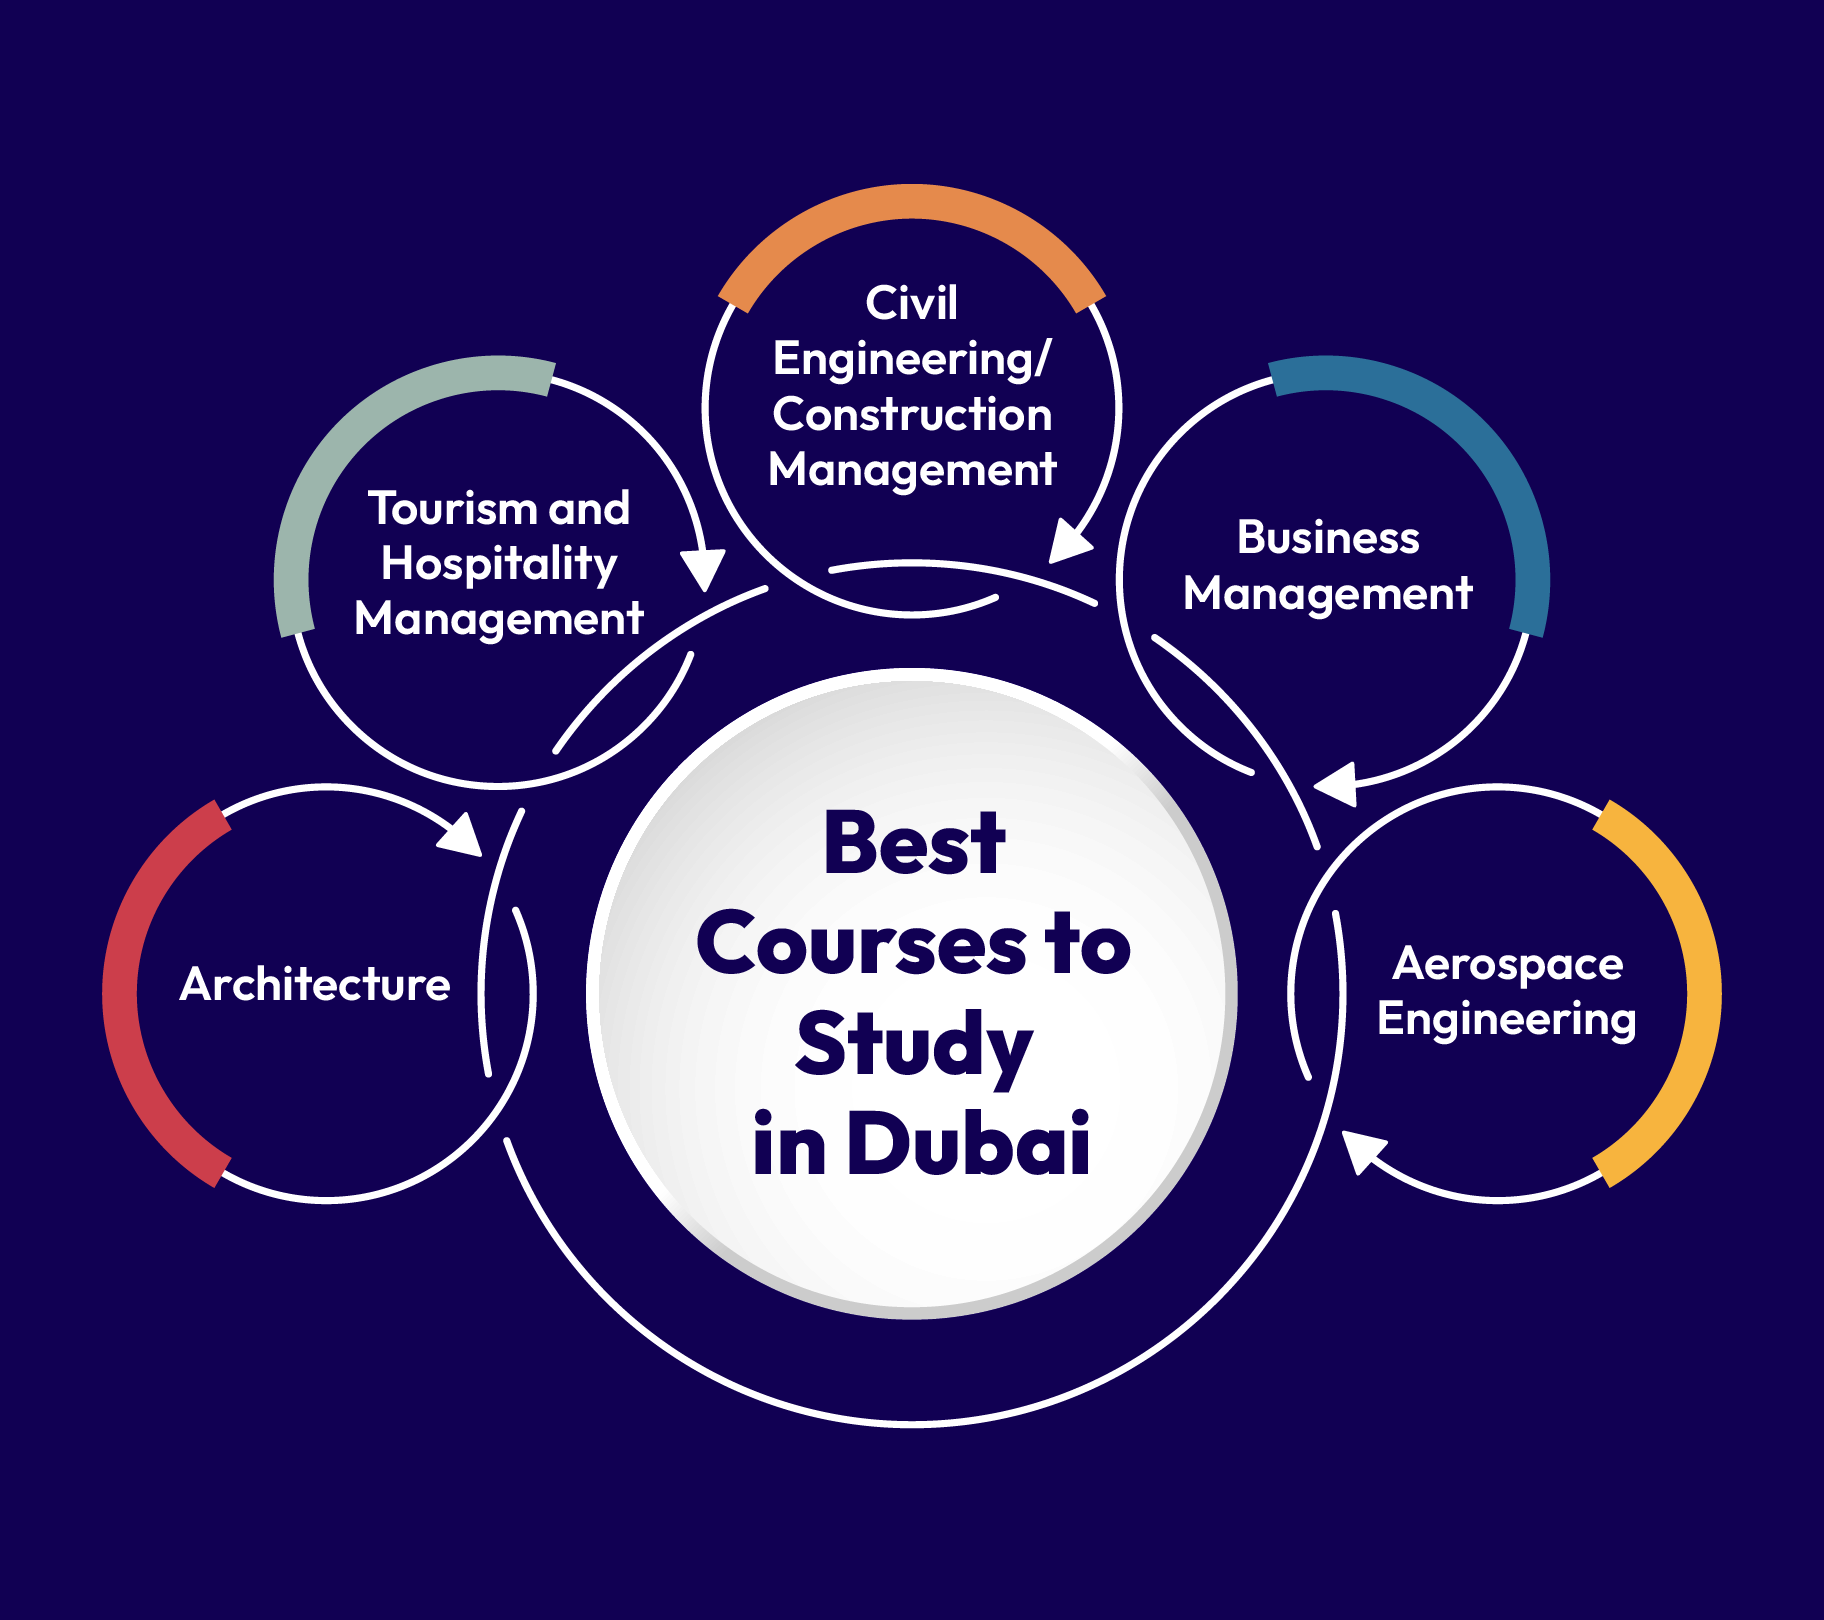 Best Courses To Study in Dubai